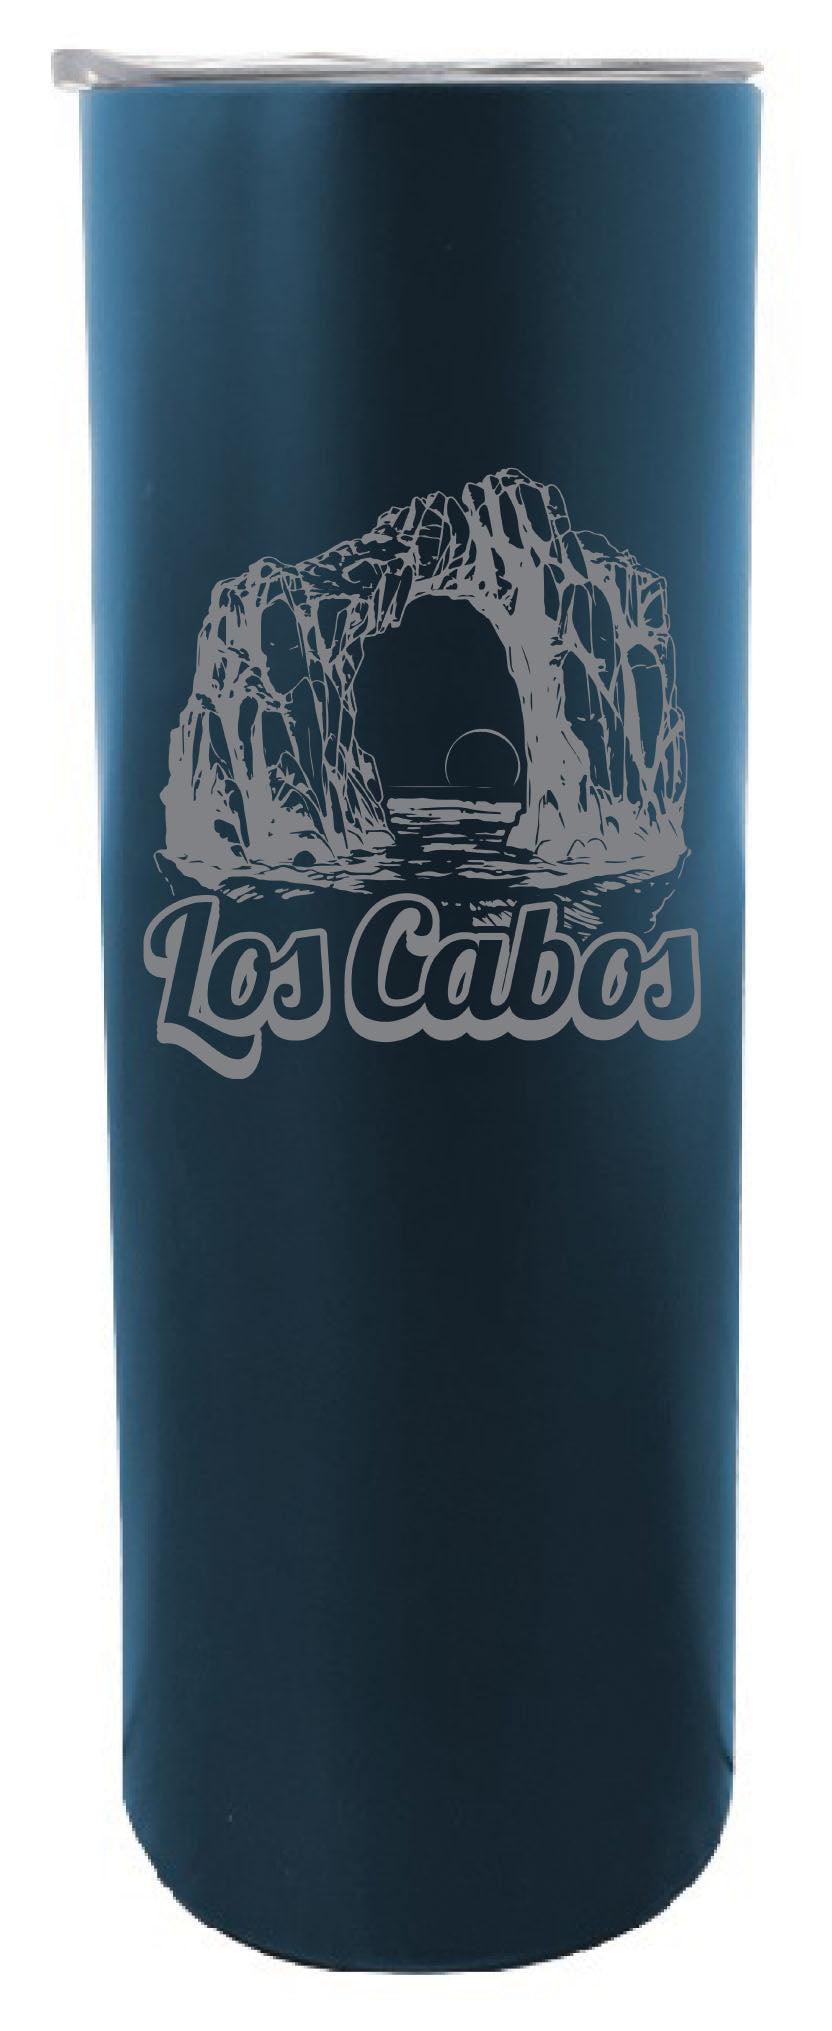 Los Cabos Mexico Souvenir 20 oz Engraved Insulated Stainless Steel Skinny Tumbler